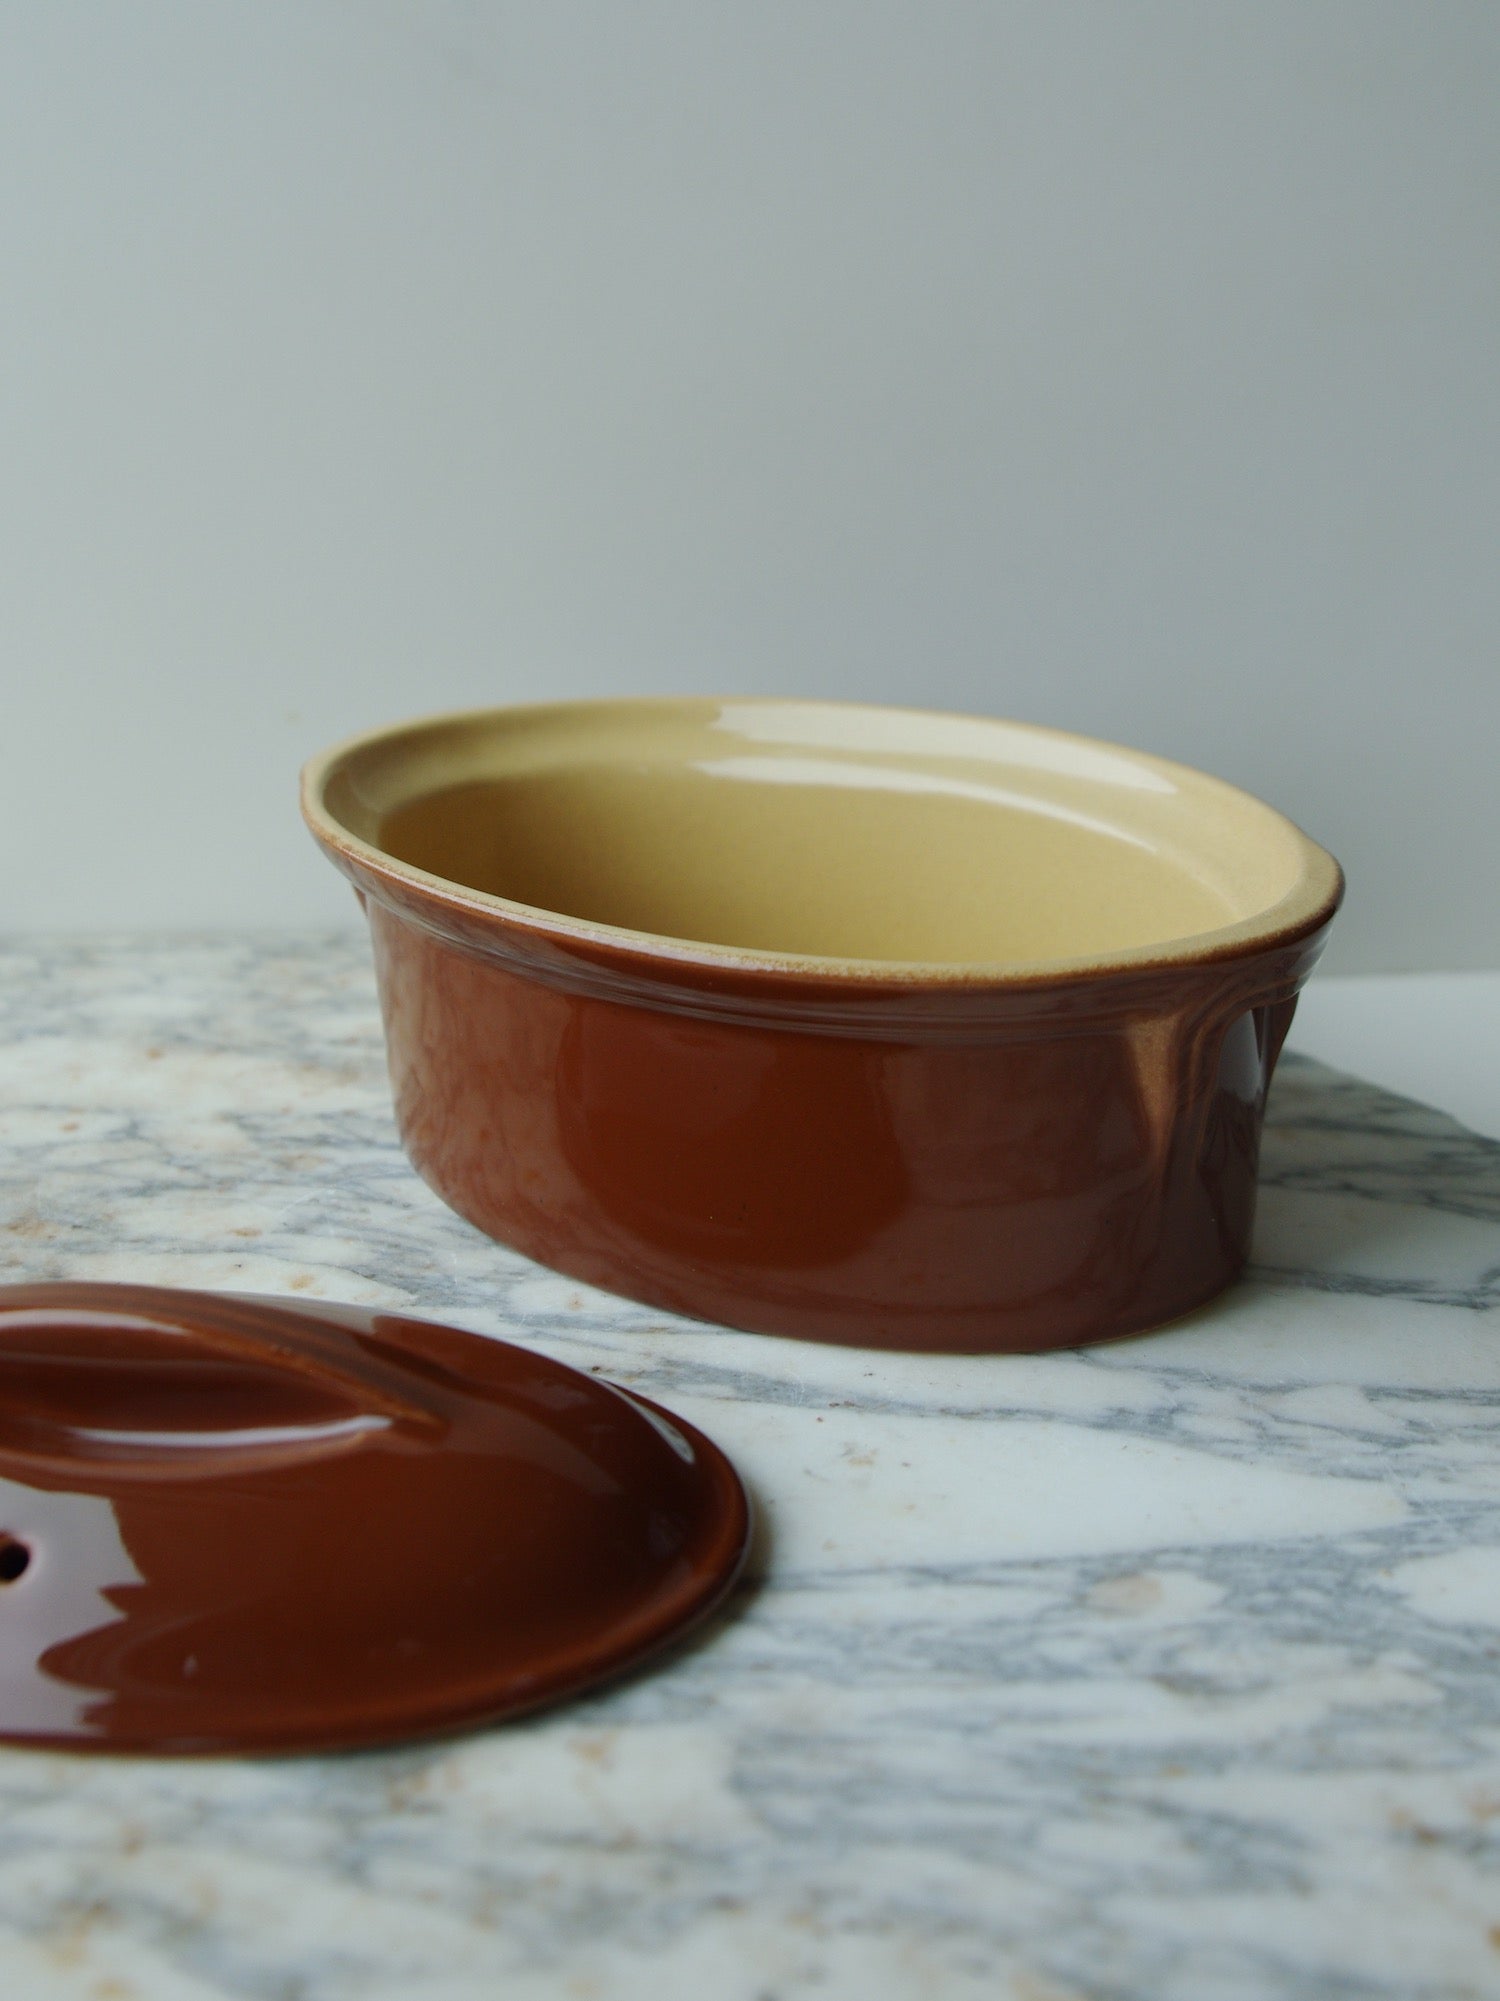 Poterie Renault Vintage French Covered Baking Dish - Brown